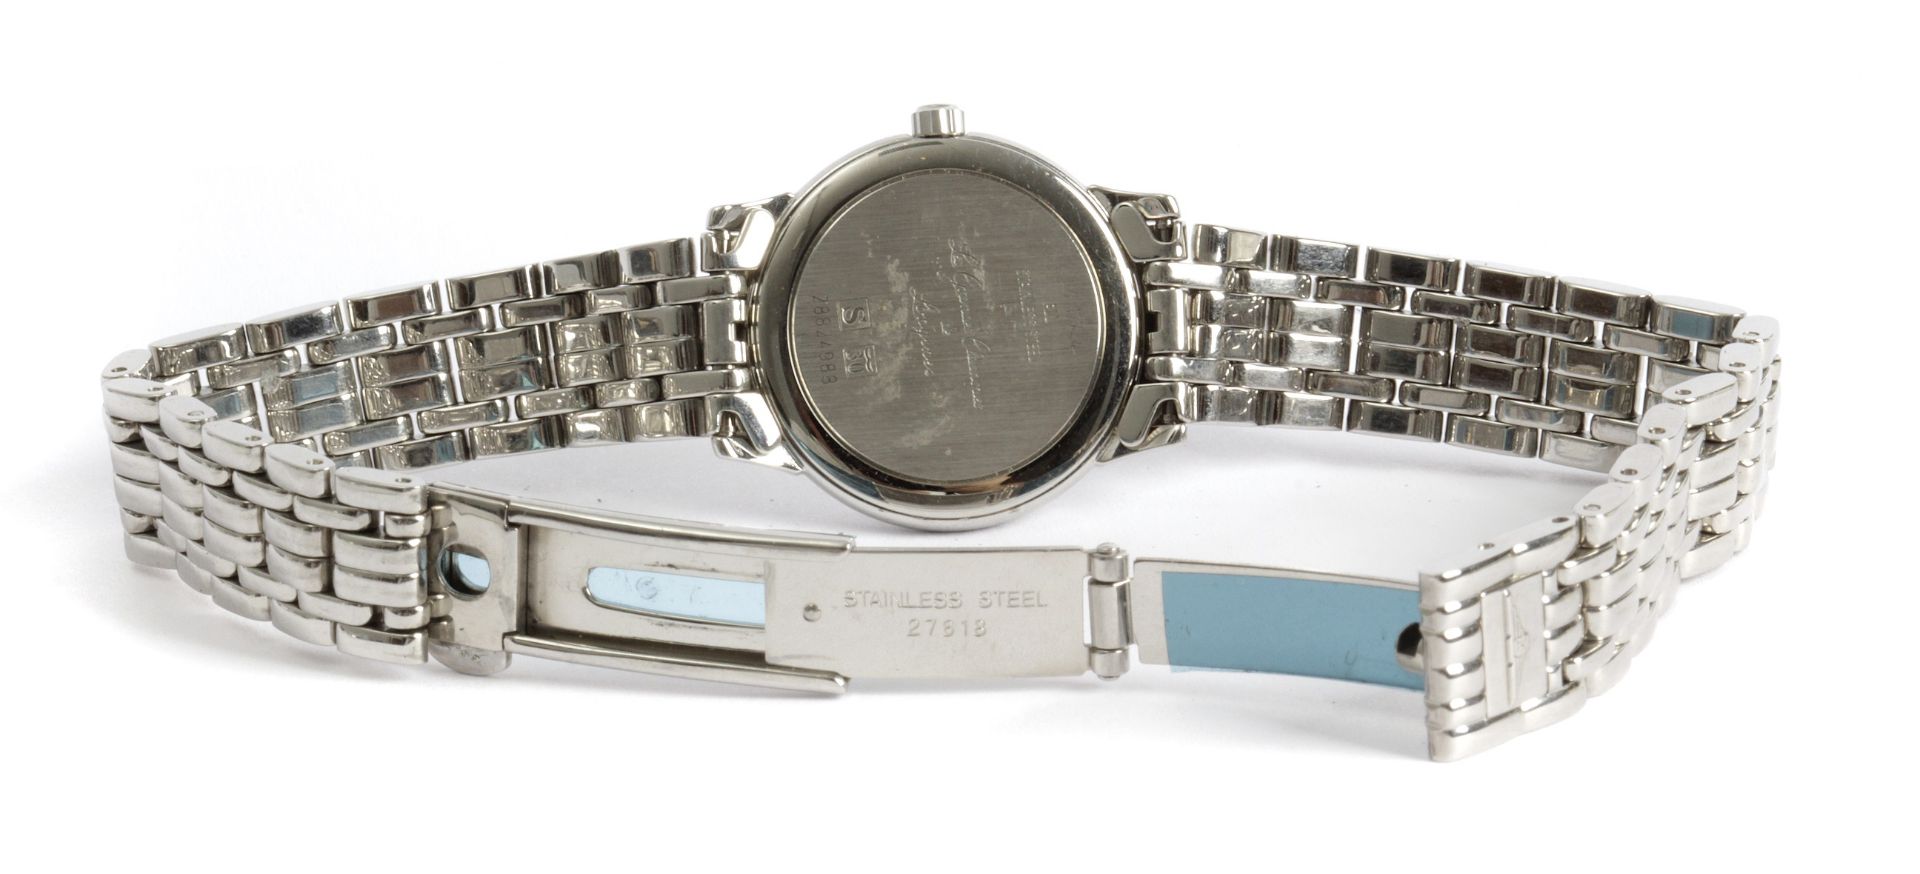 Longines ladies stainless steel wristwatch - Image 3 of 3